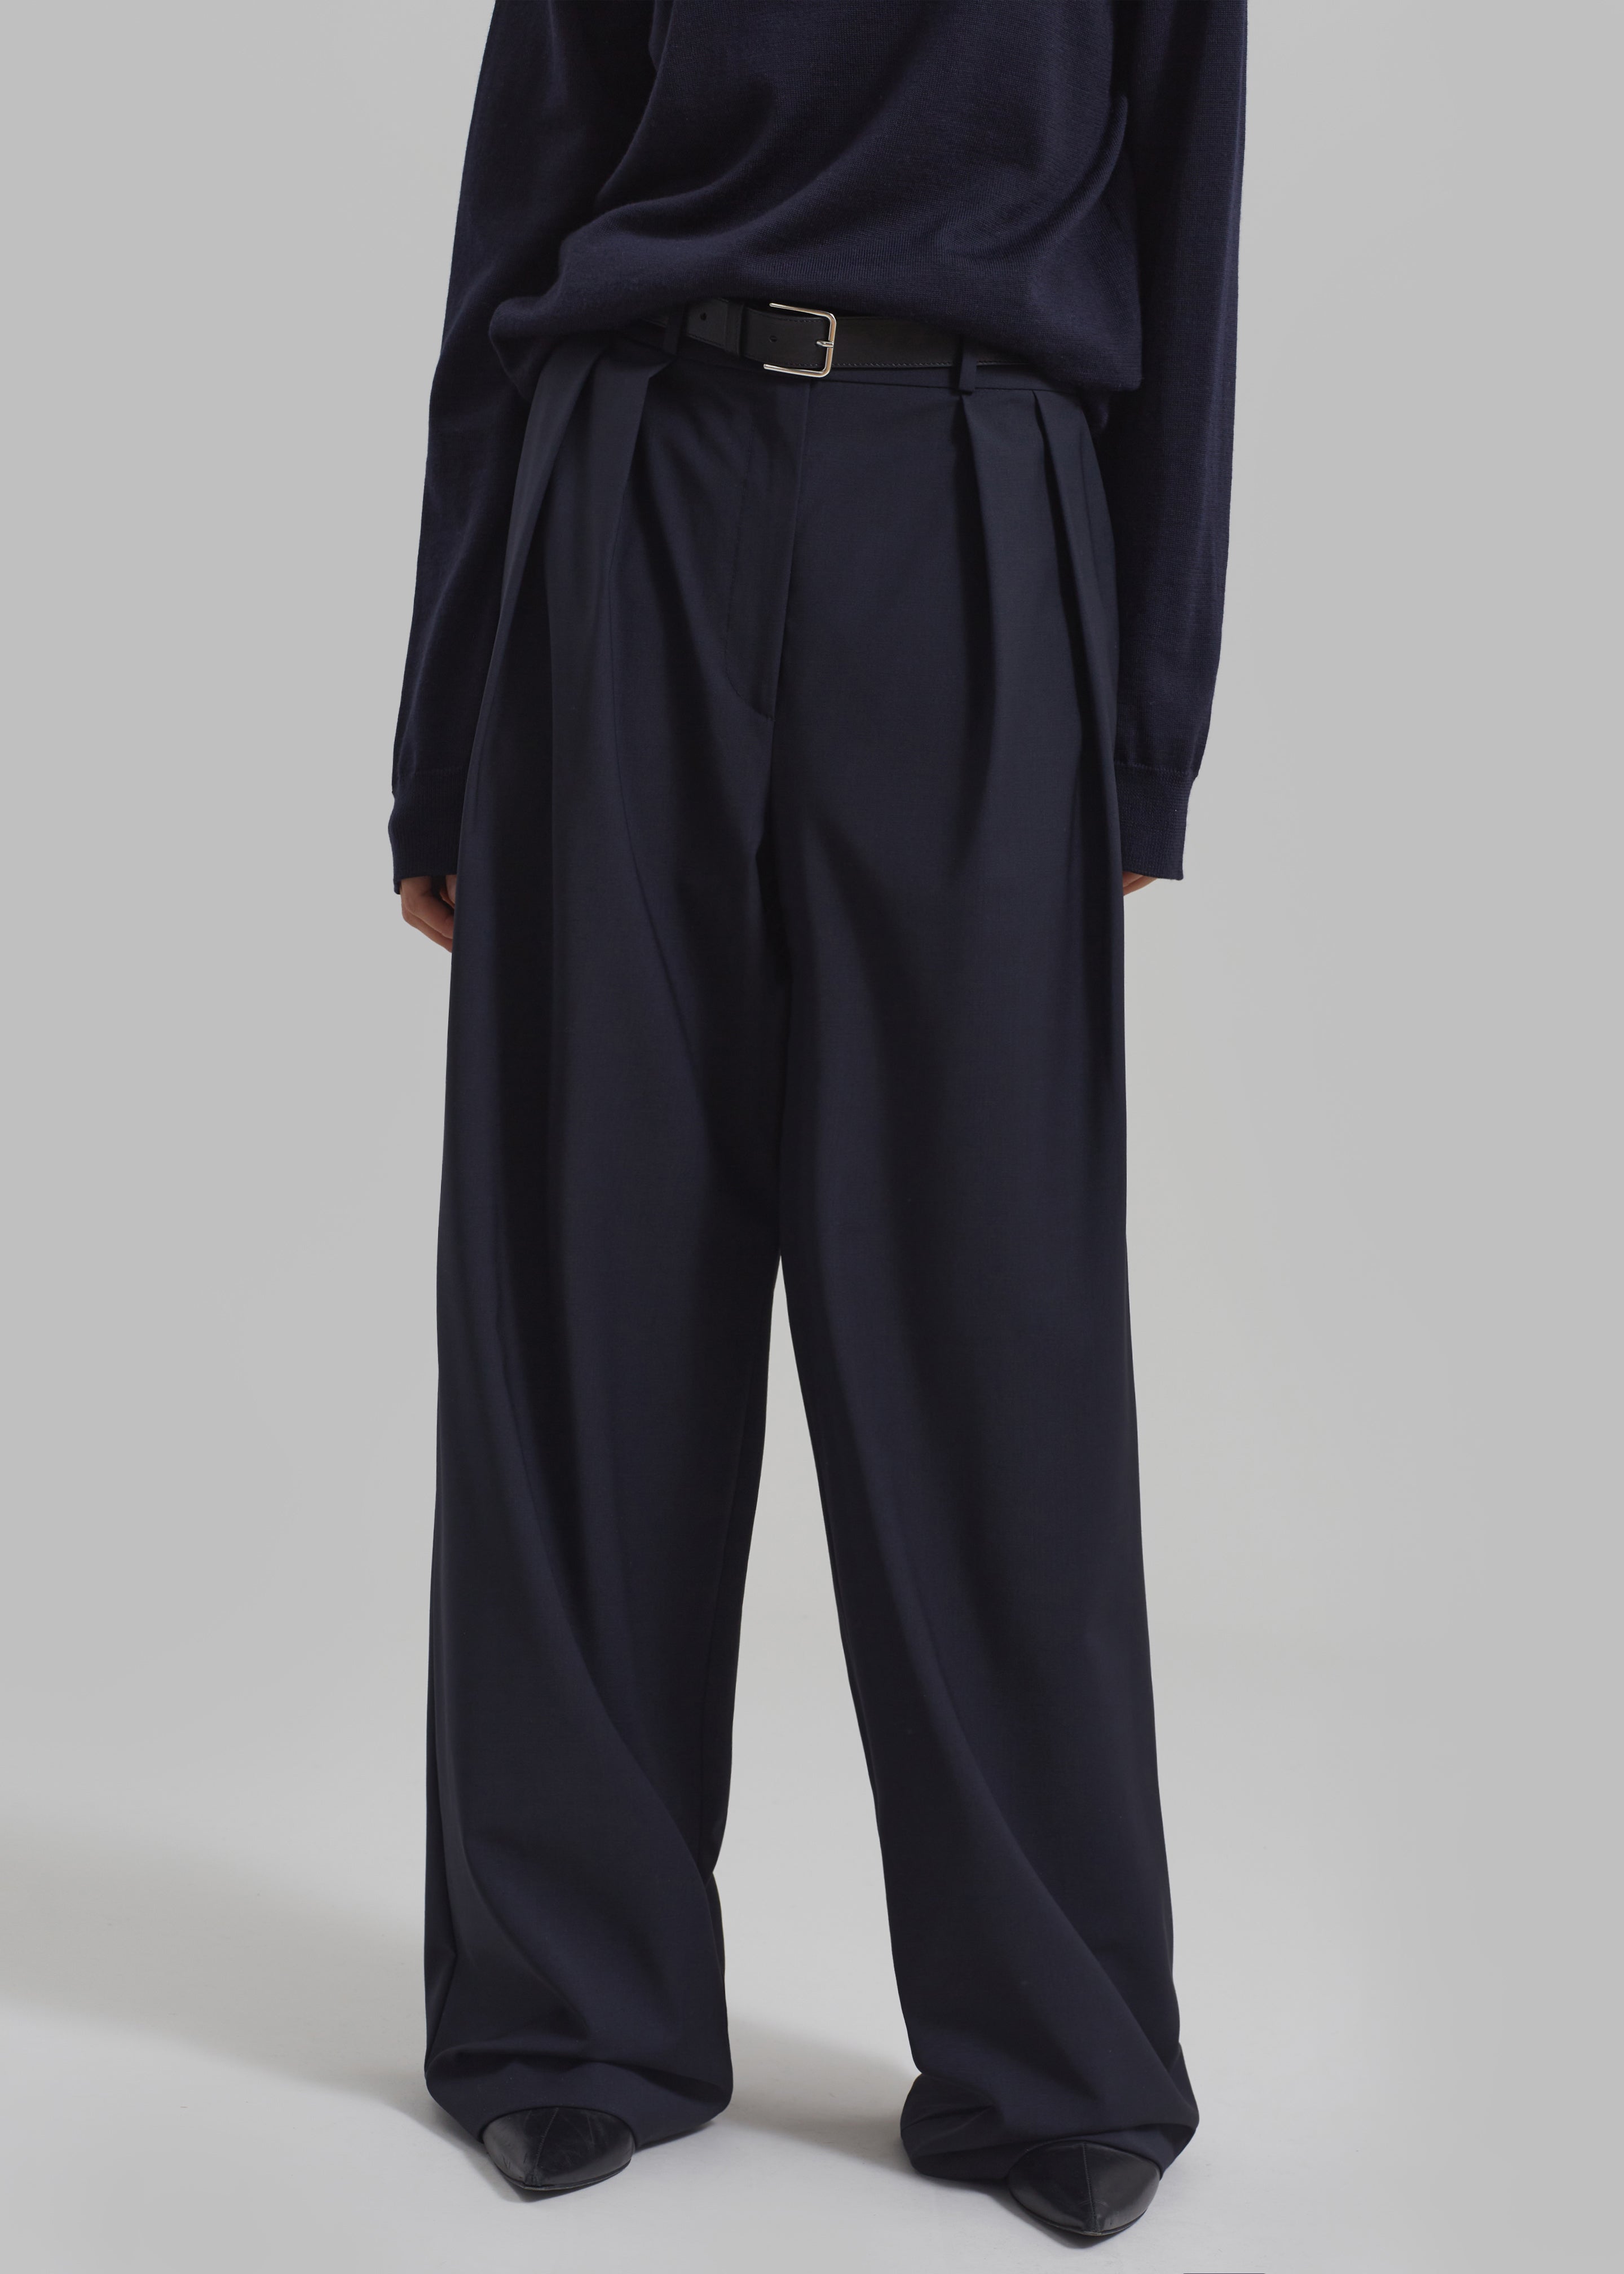 Ripley Pleated Trousers - Navy - 2